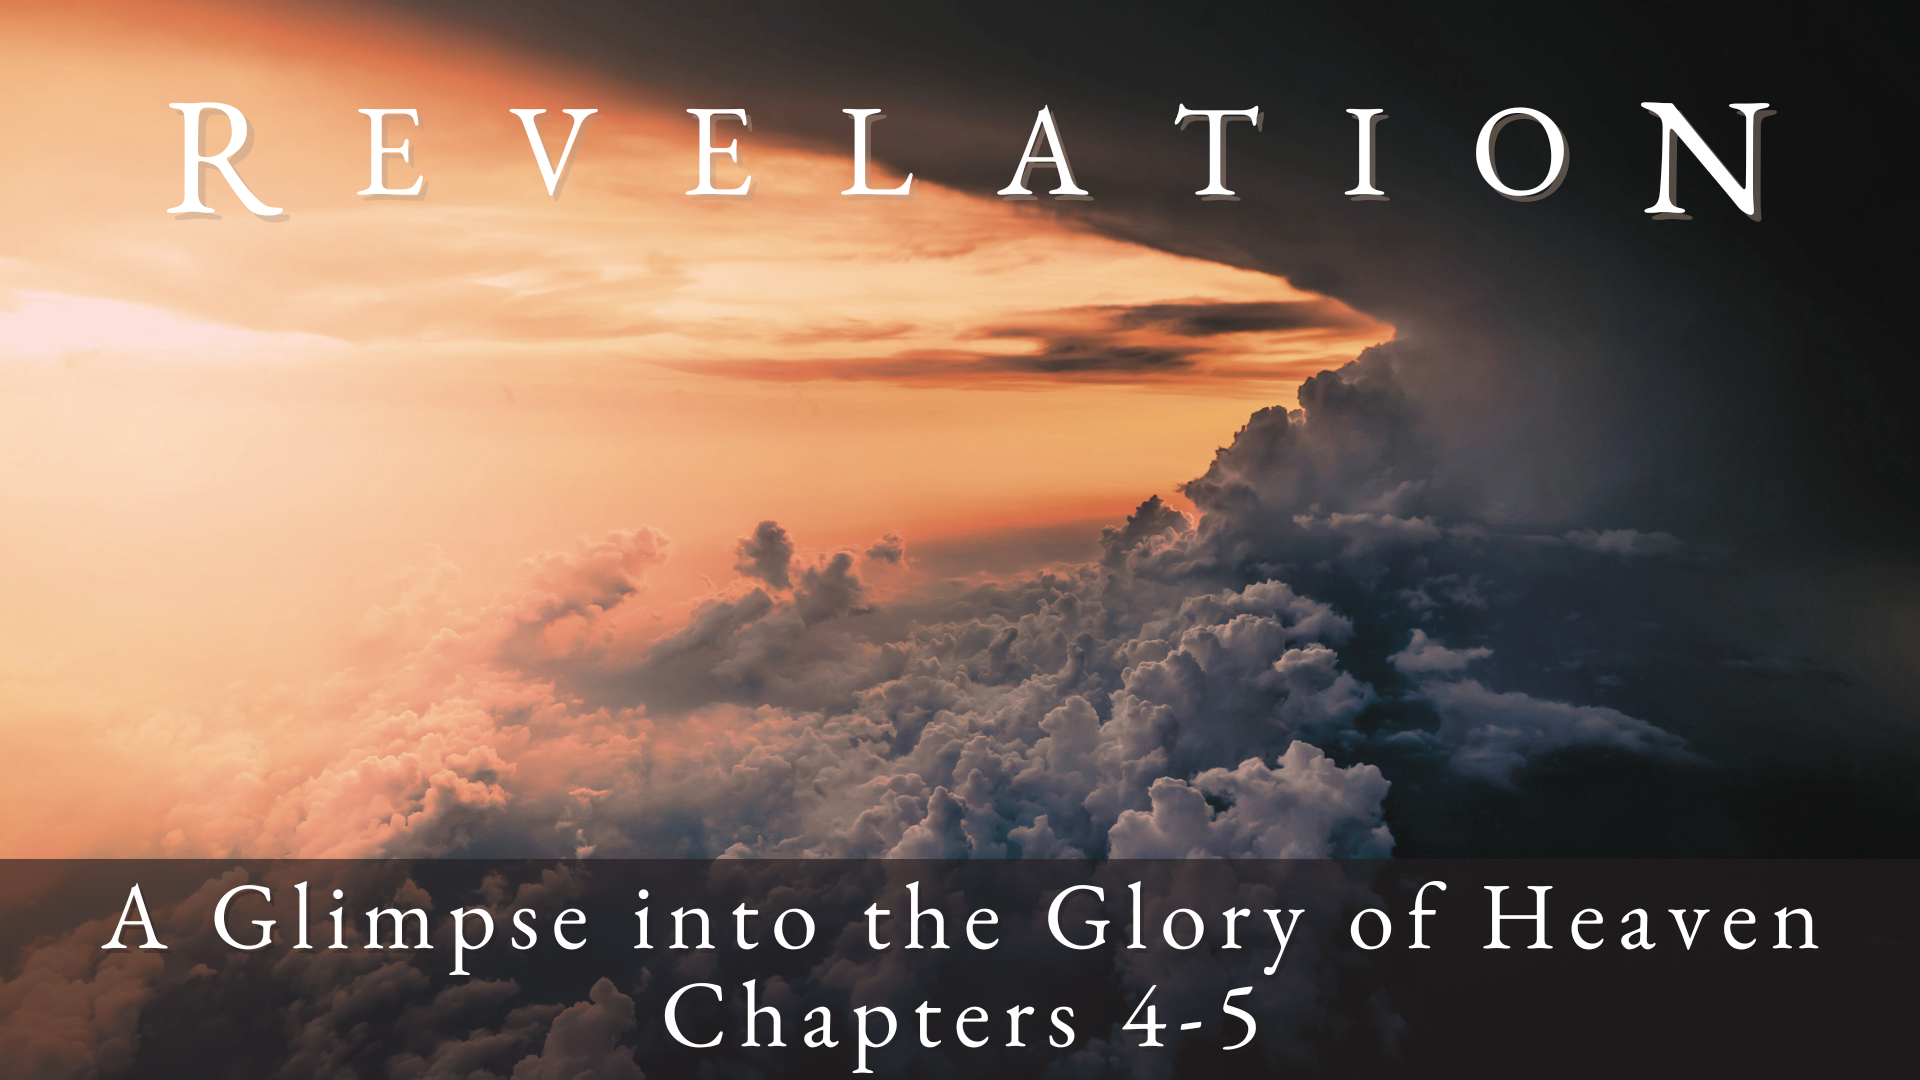 Revelation Chapters 4-5 no date (9 x 5 in.)